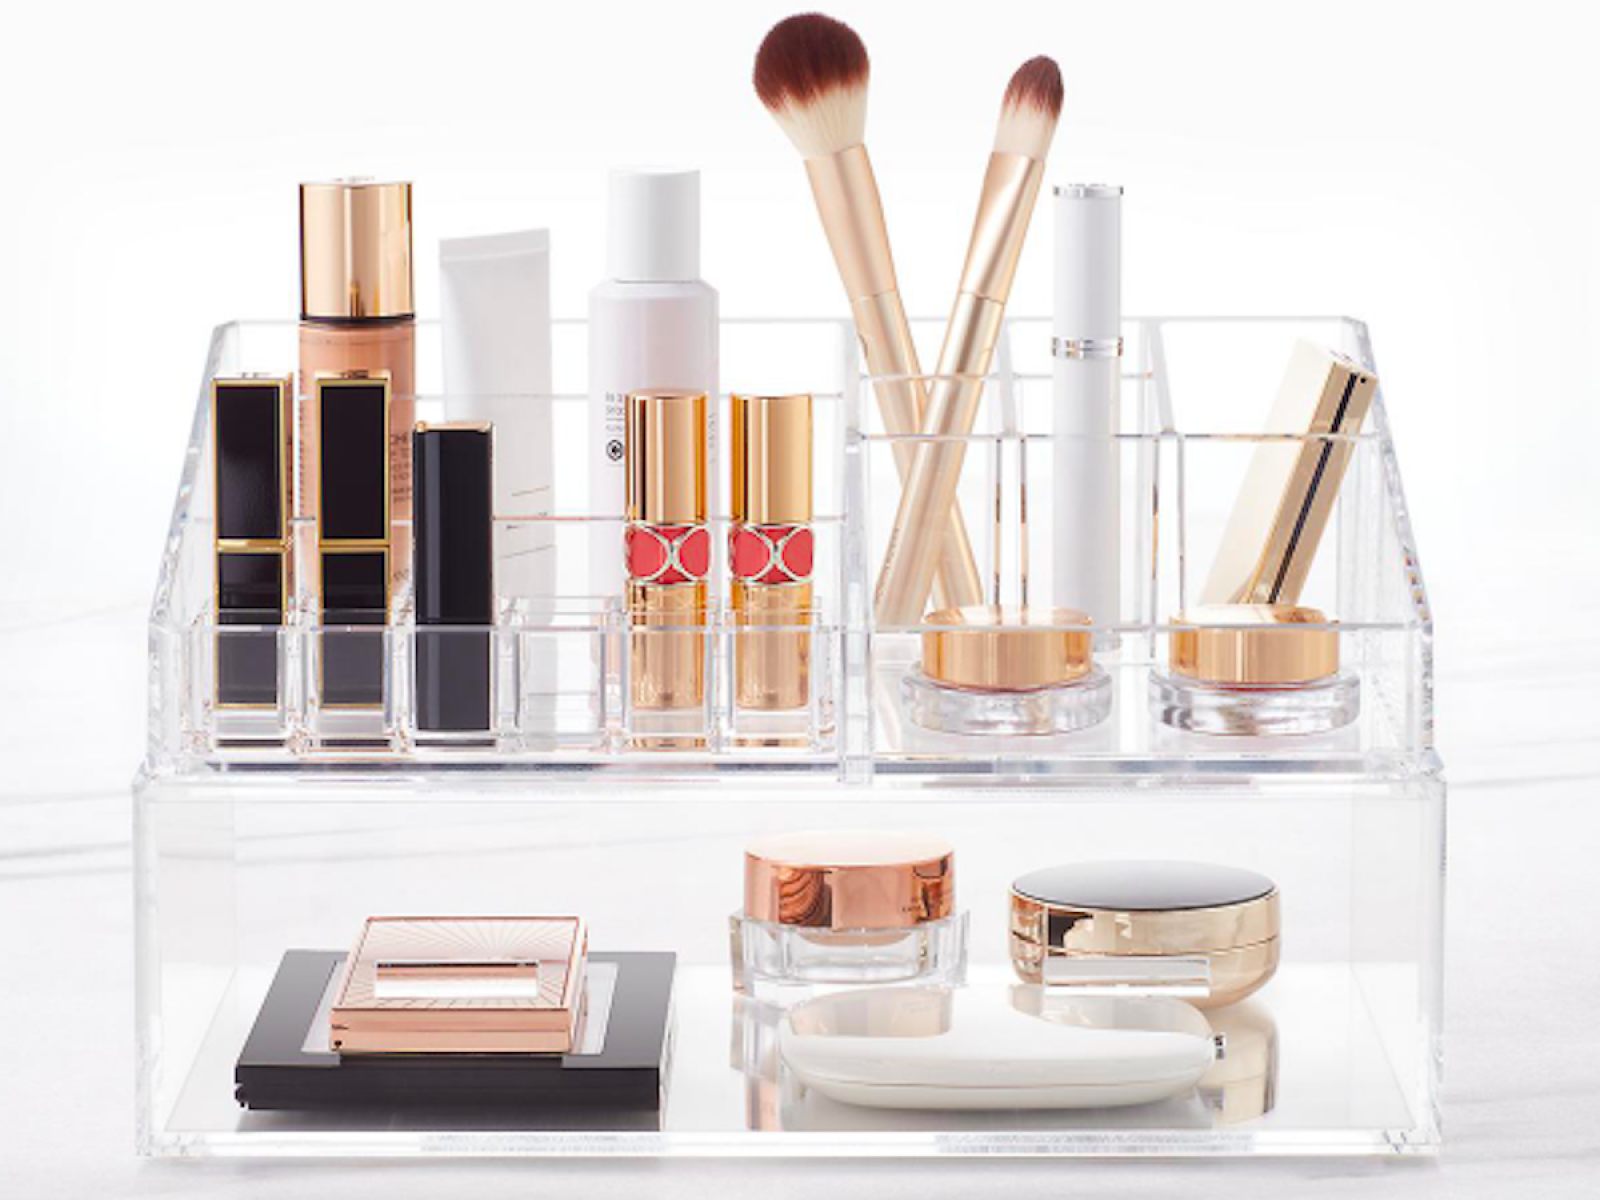 Get Your Makeup Organized in 2022 With 11 Outstanding Products